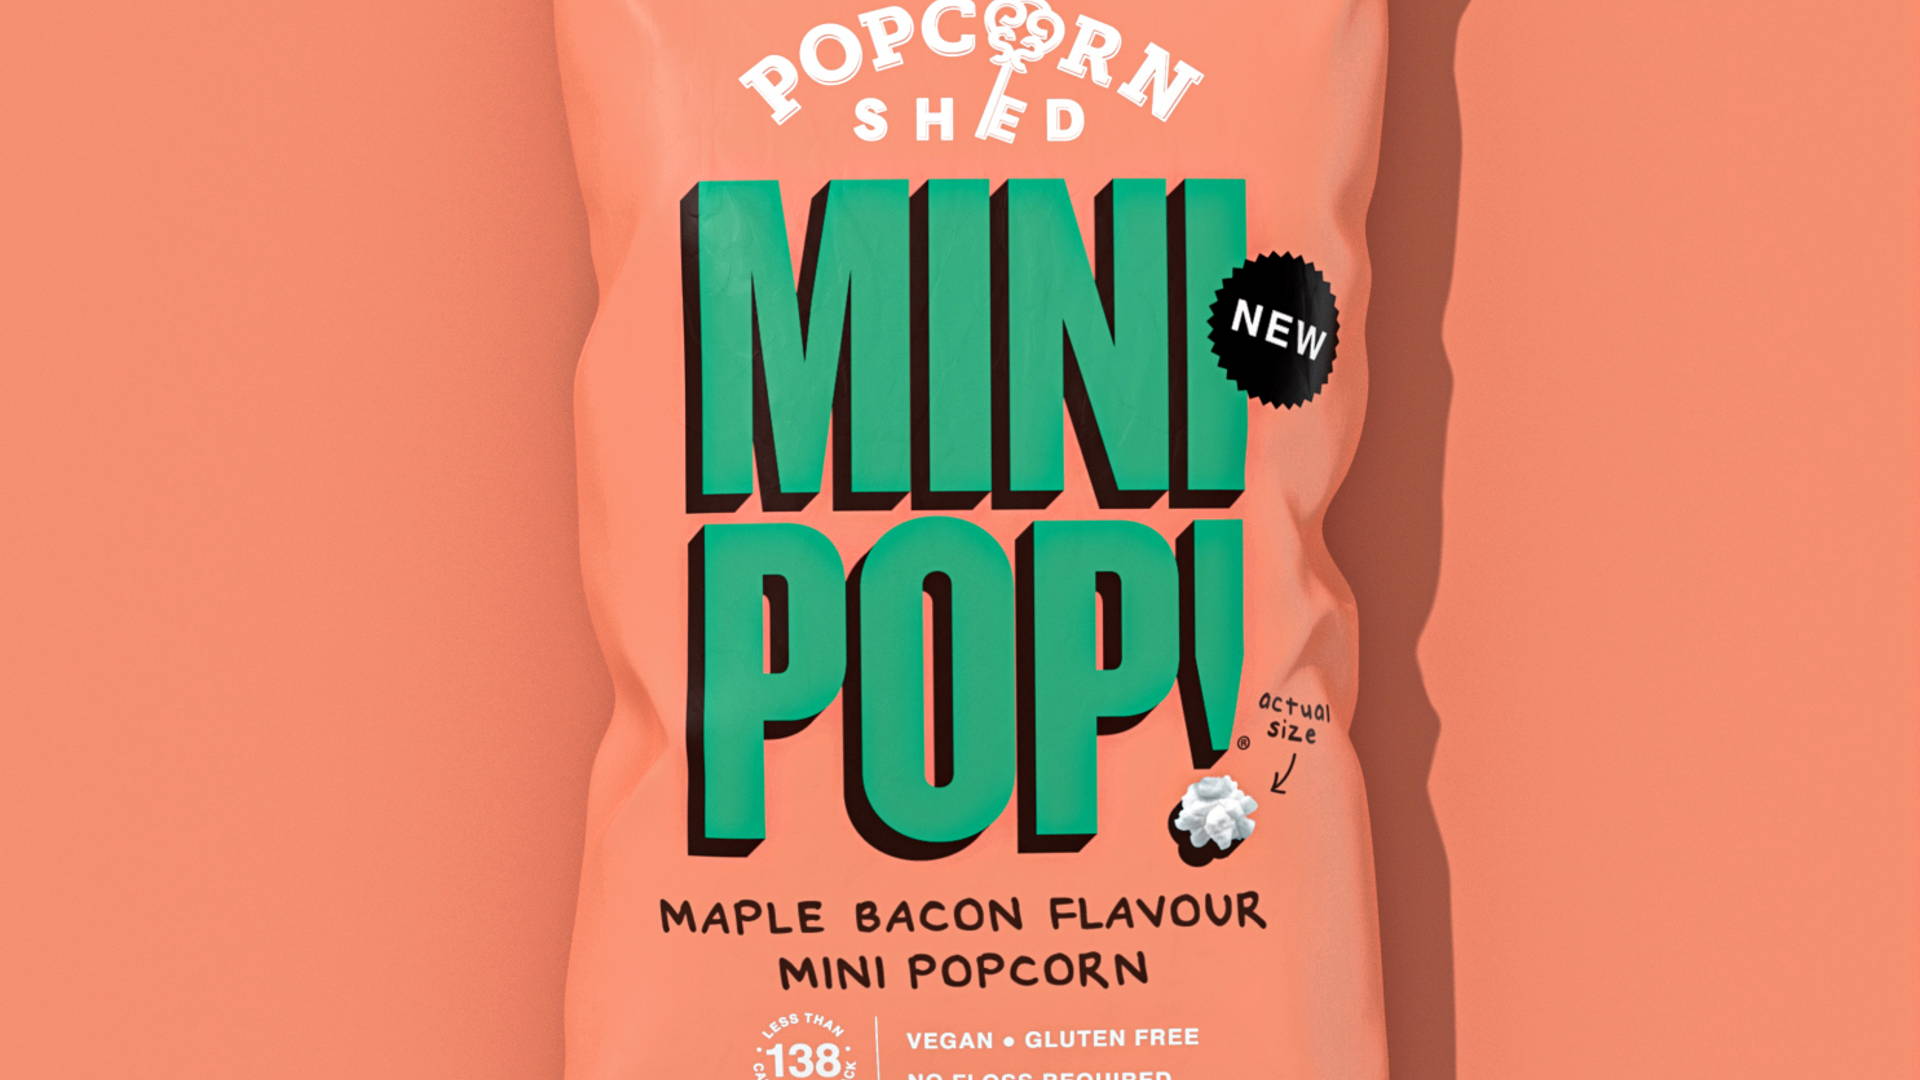 Featured image for MiniPop! Is Making A Big Statement With Their Vegan Maple Bacon Flavor